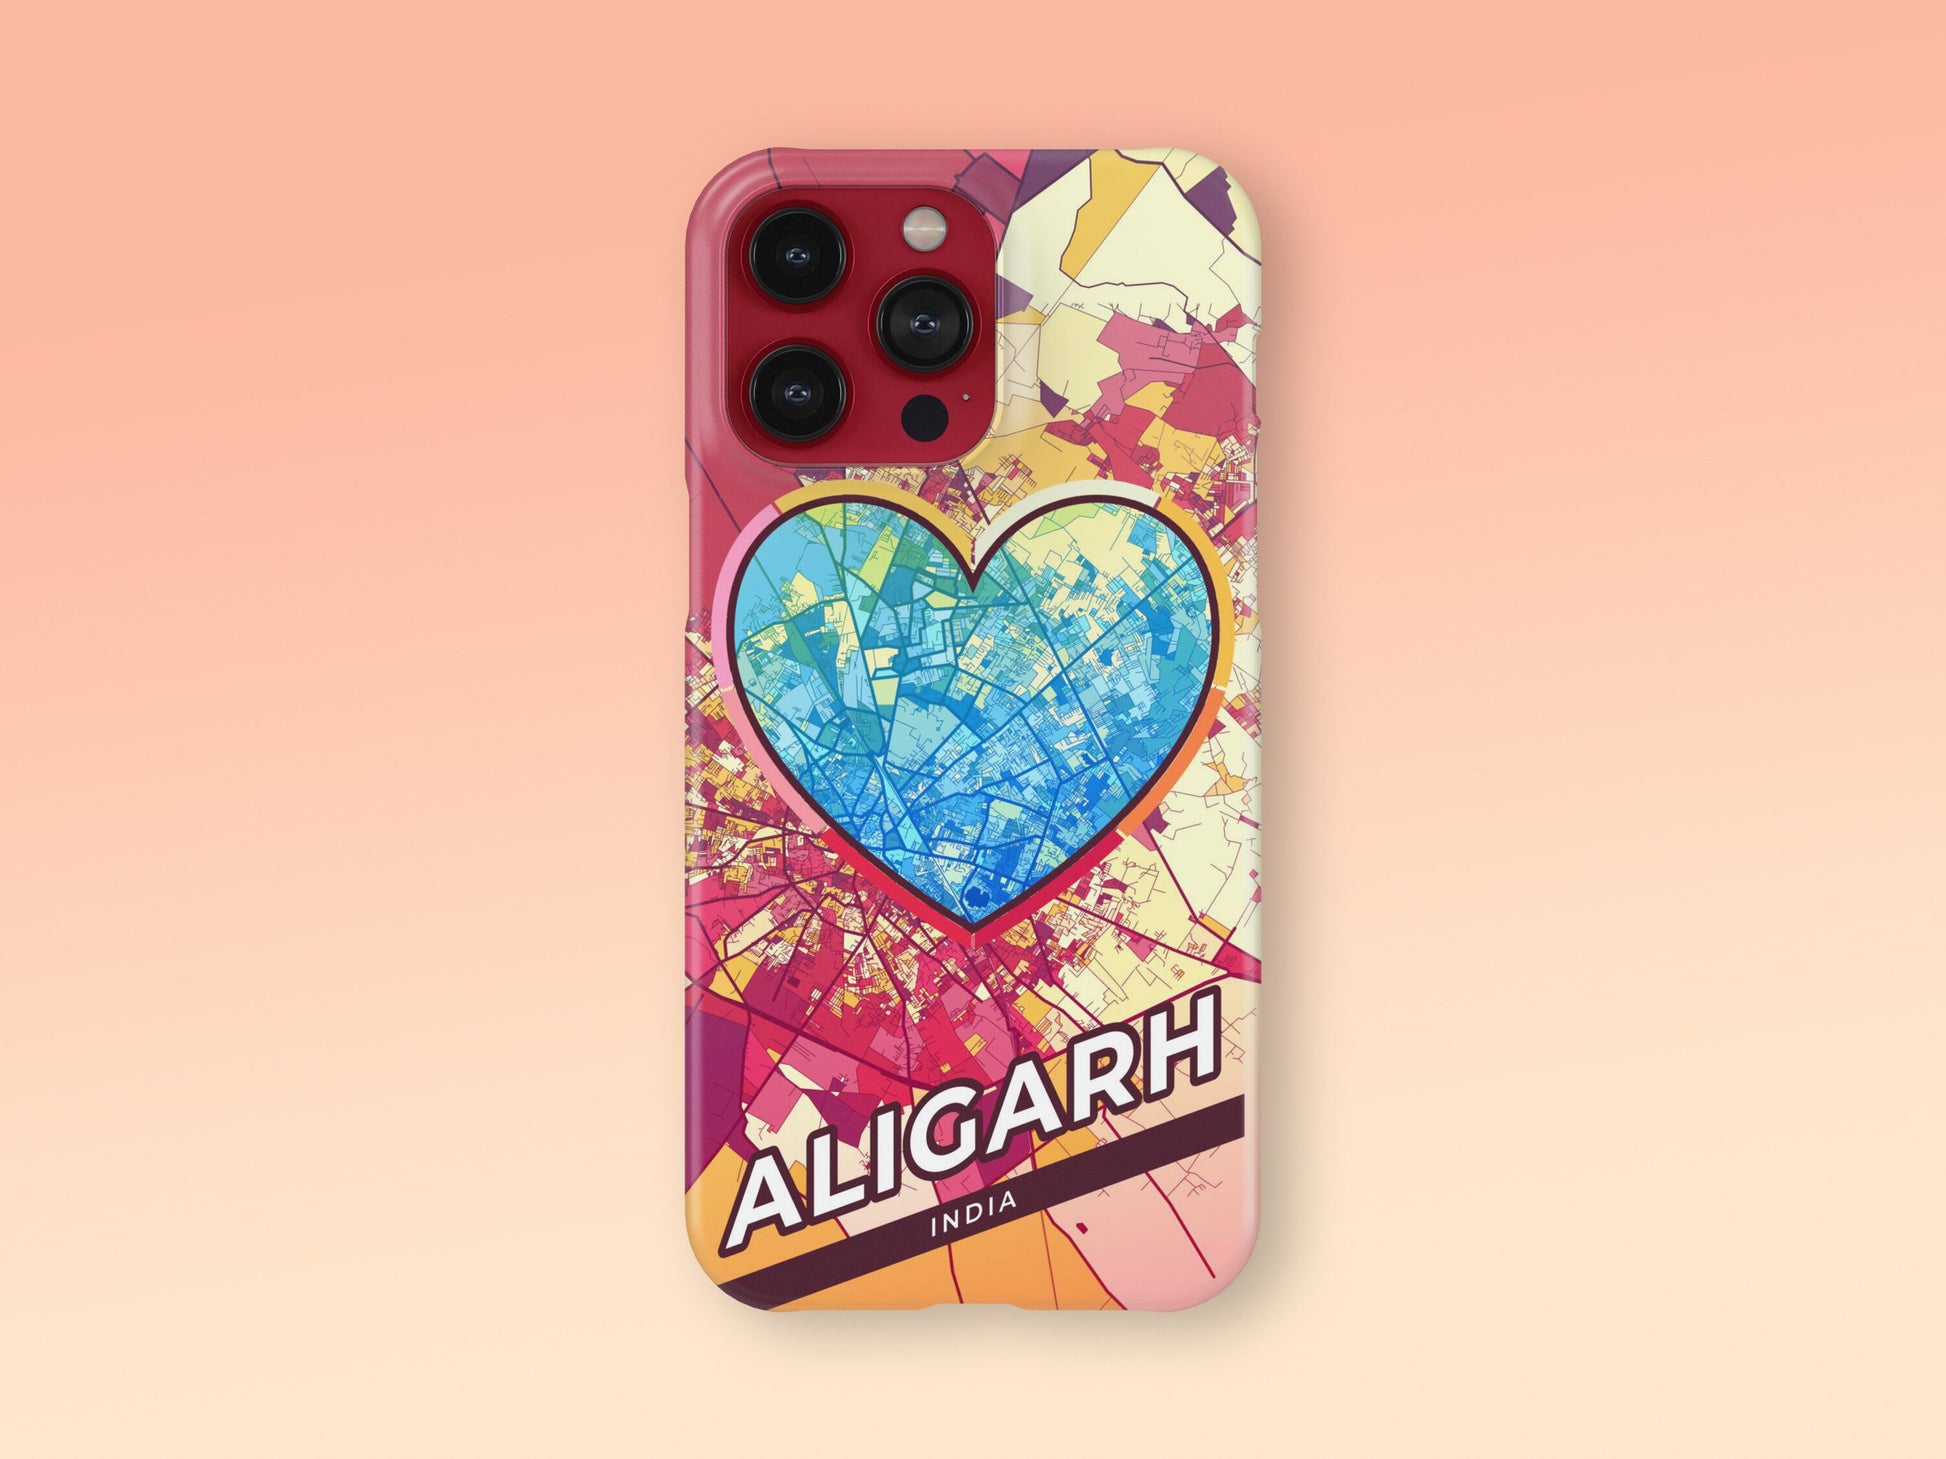 Aligarh India slim phone case with colorful icon. Birthday, wedding or housewarming gift. Couple match cases. 2